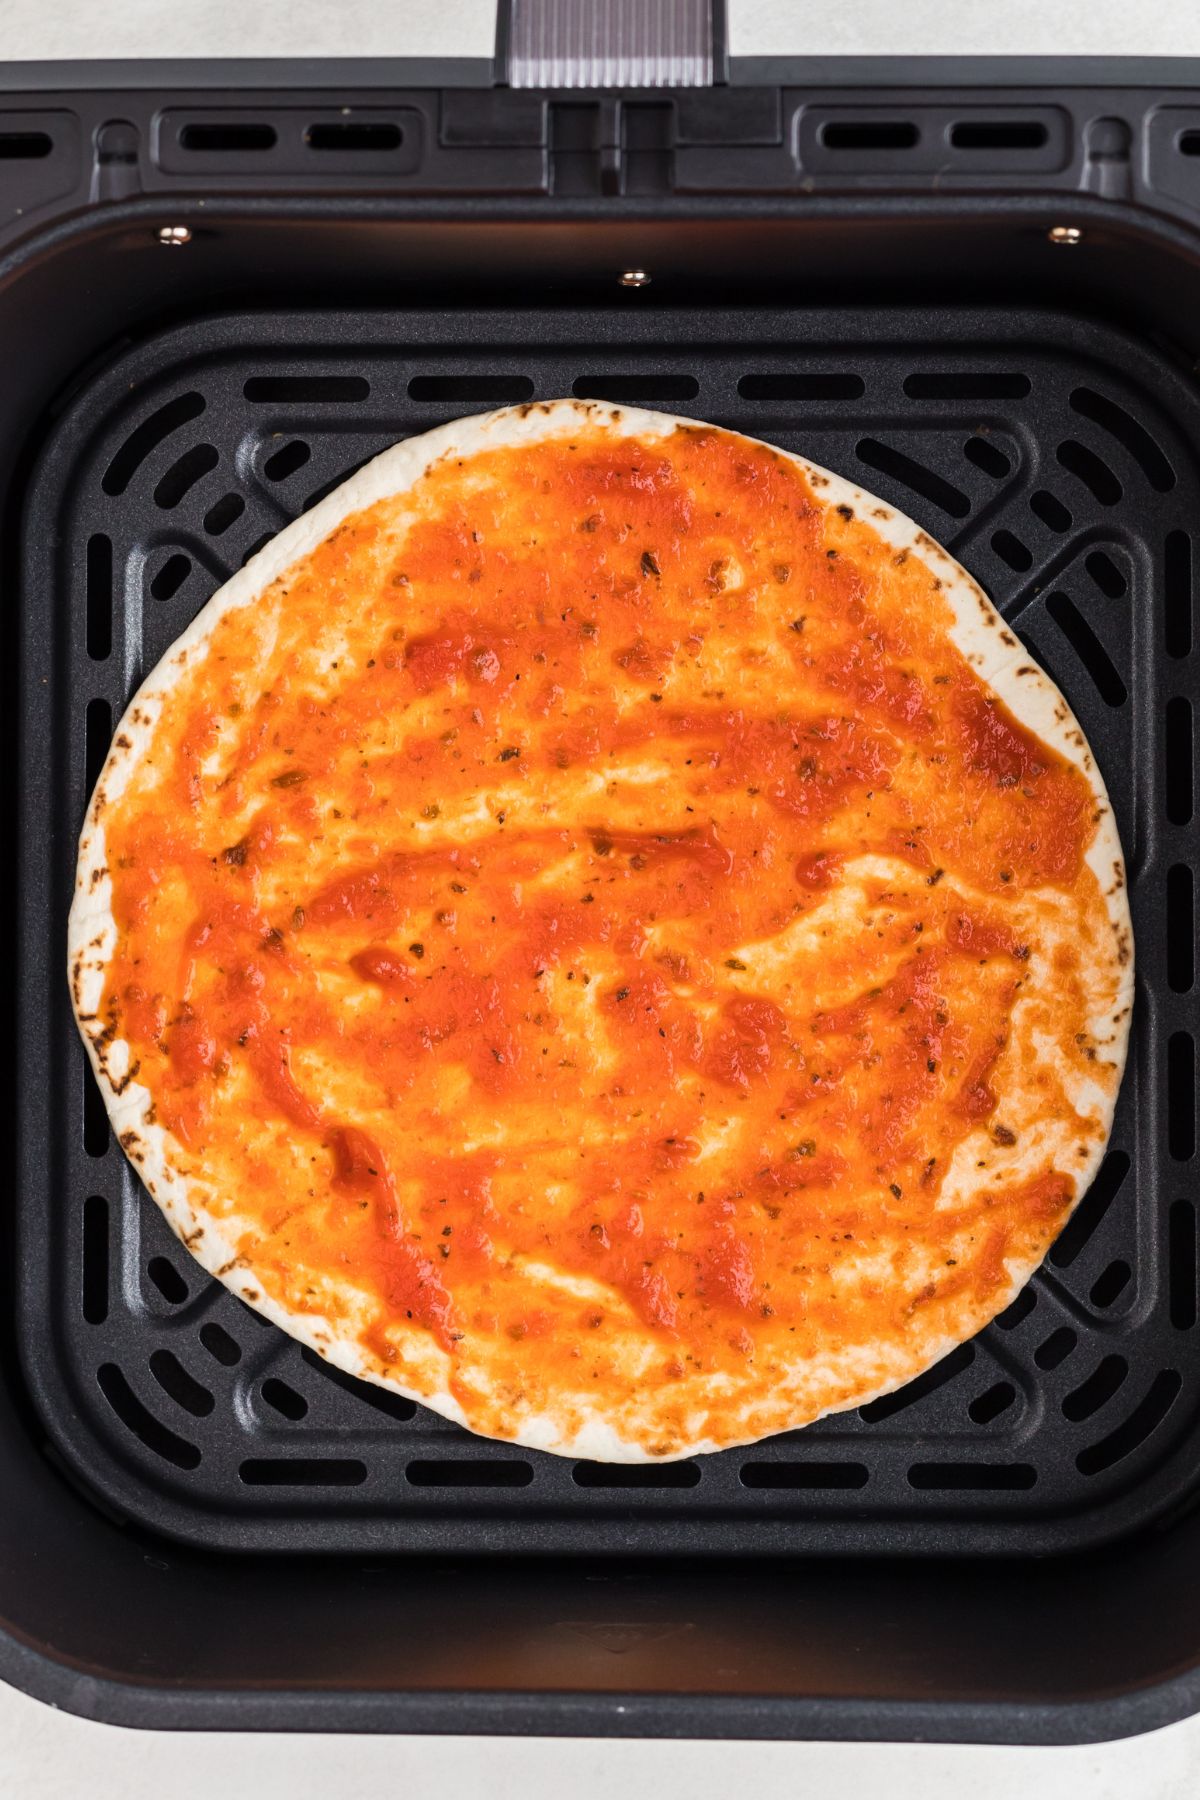 Tortilla in the air fryer basket with pizza sauce spread on top.